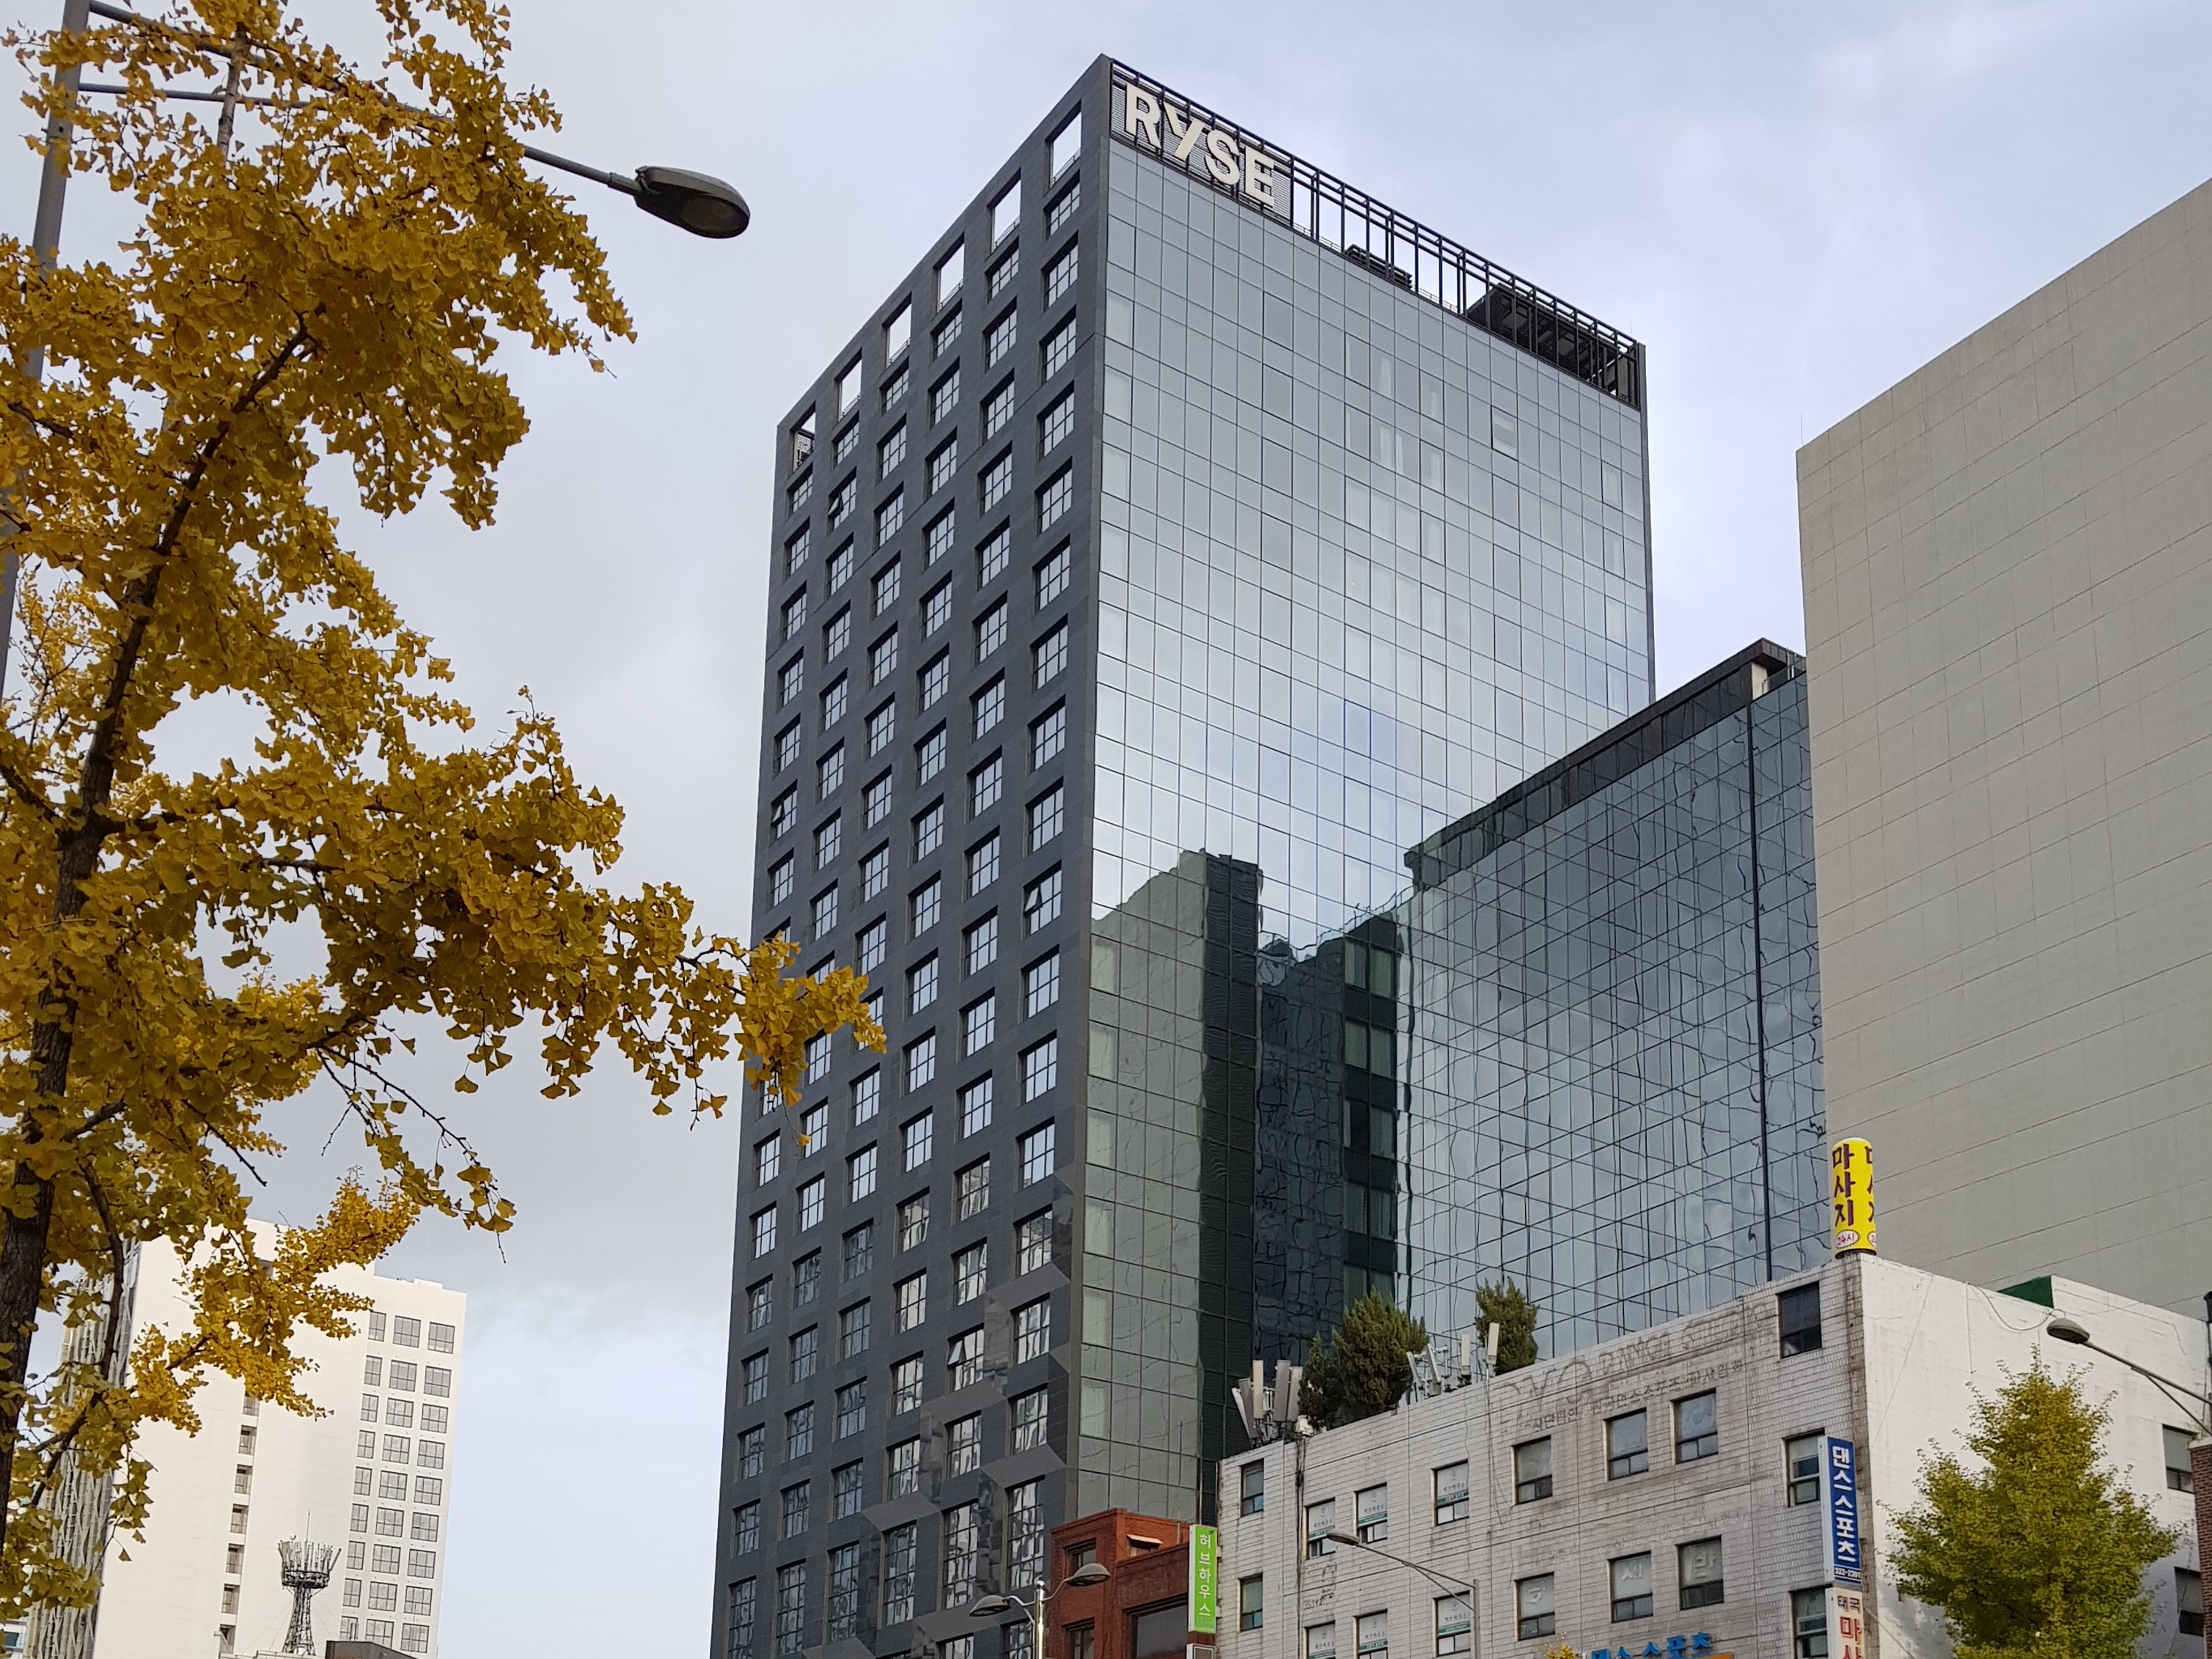 RYSE, Autograph Collection by Marriott0 : A View of the hotel building from Hongdae Station Intersection